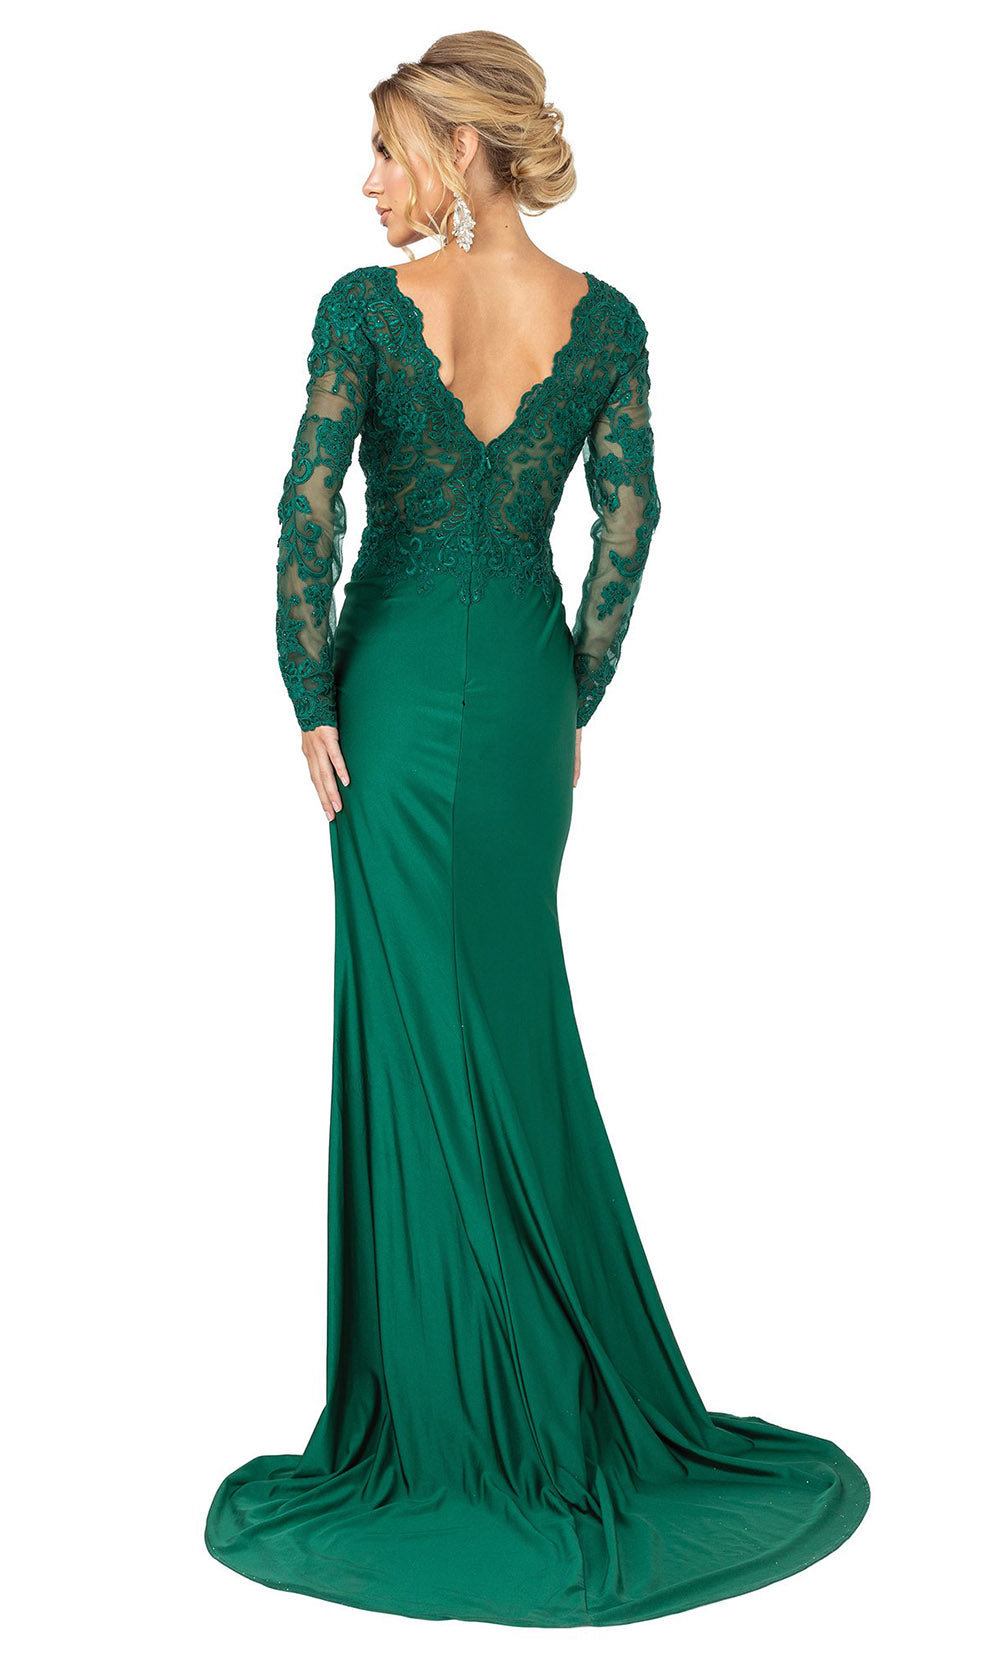 Dancing Queen - 4124 V Neck And Back Formal Long Dress In Green